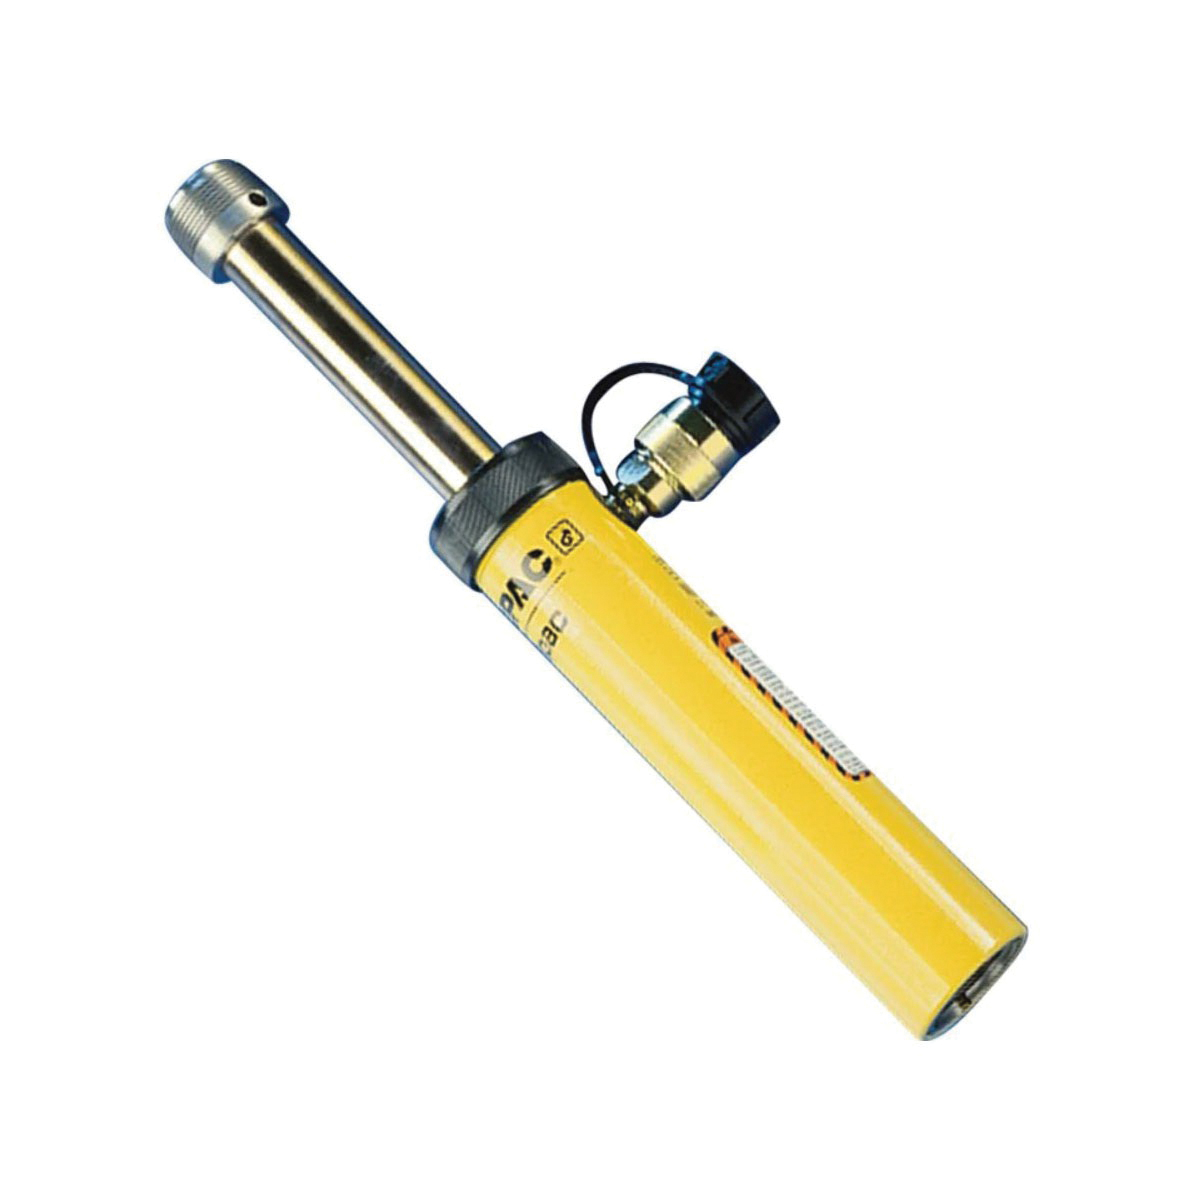 ENERPAC® Hydraulic Cylinder BRC46, Single Acting Cylinder, 5.6 ton Retract Cylinder, 10000 psi Max Operating Pressure